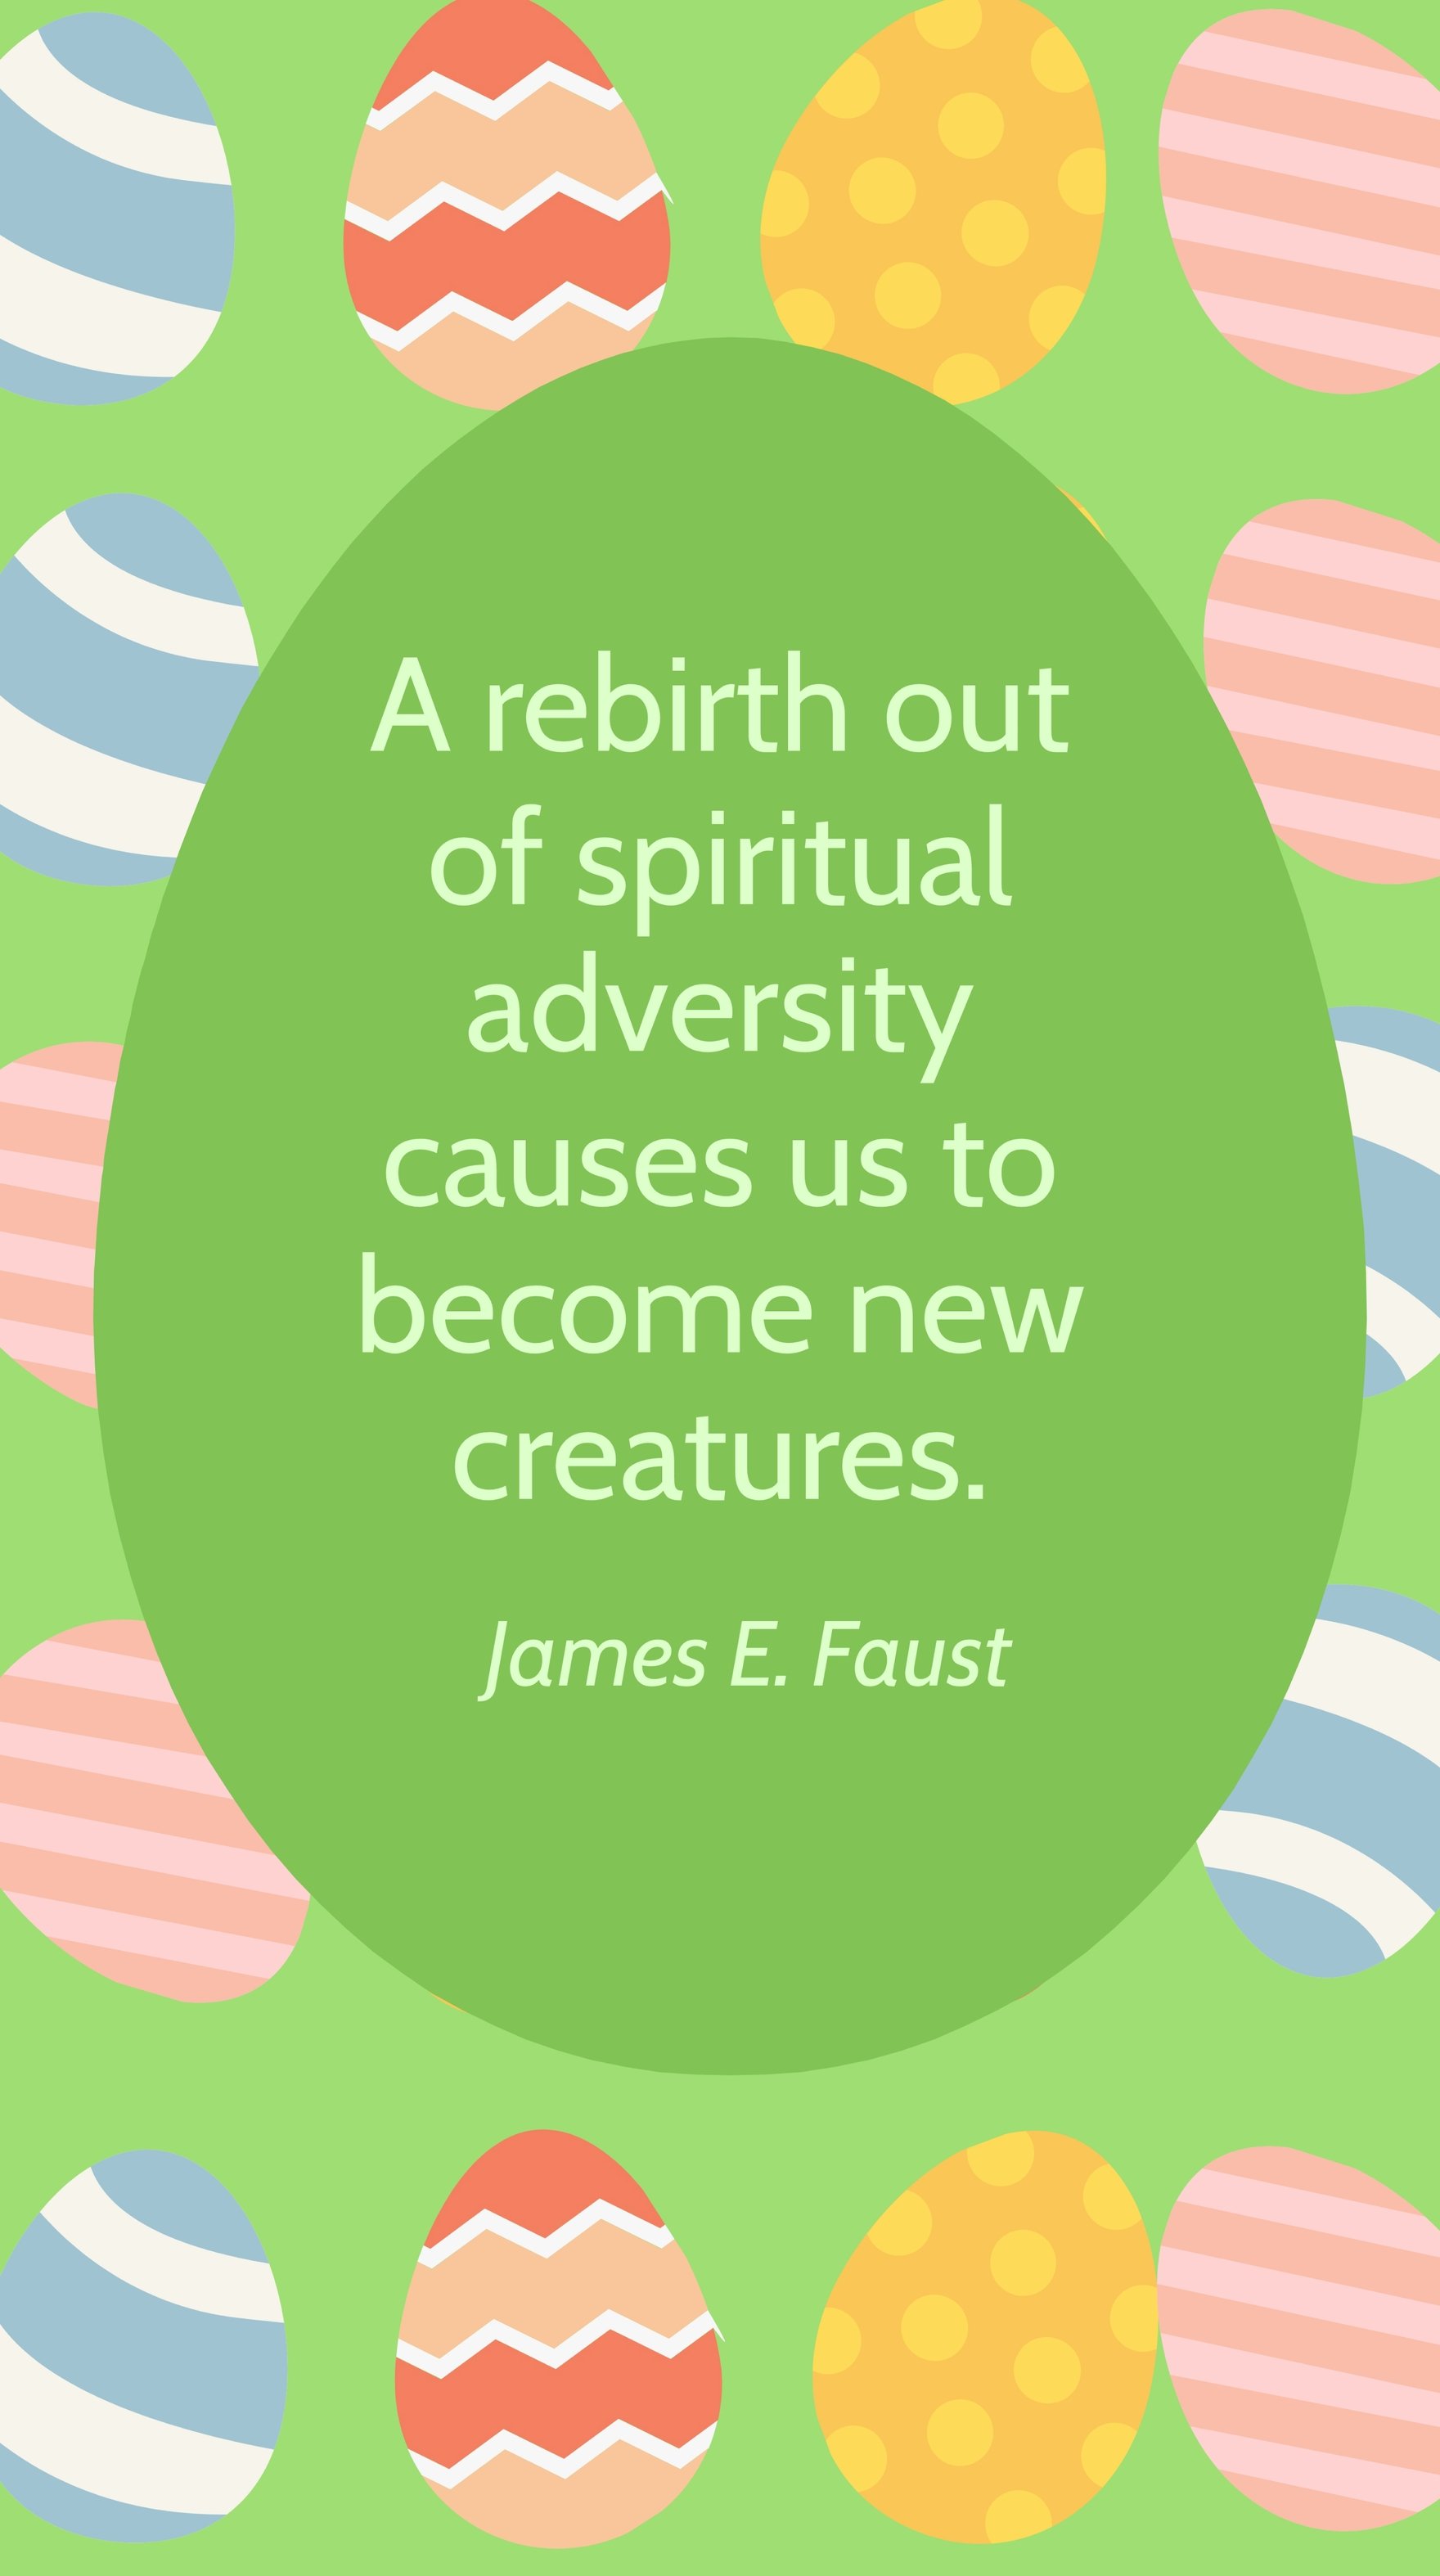 Free James E. Faust - A rebirth out of spiritual adversity causes us to become new creatures.